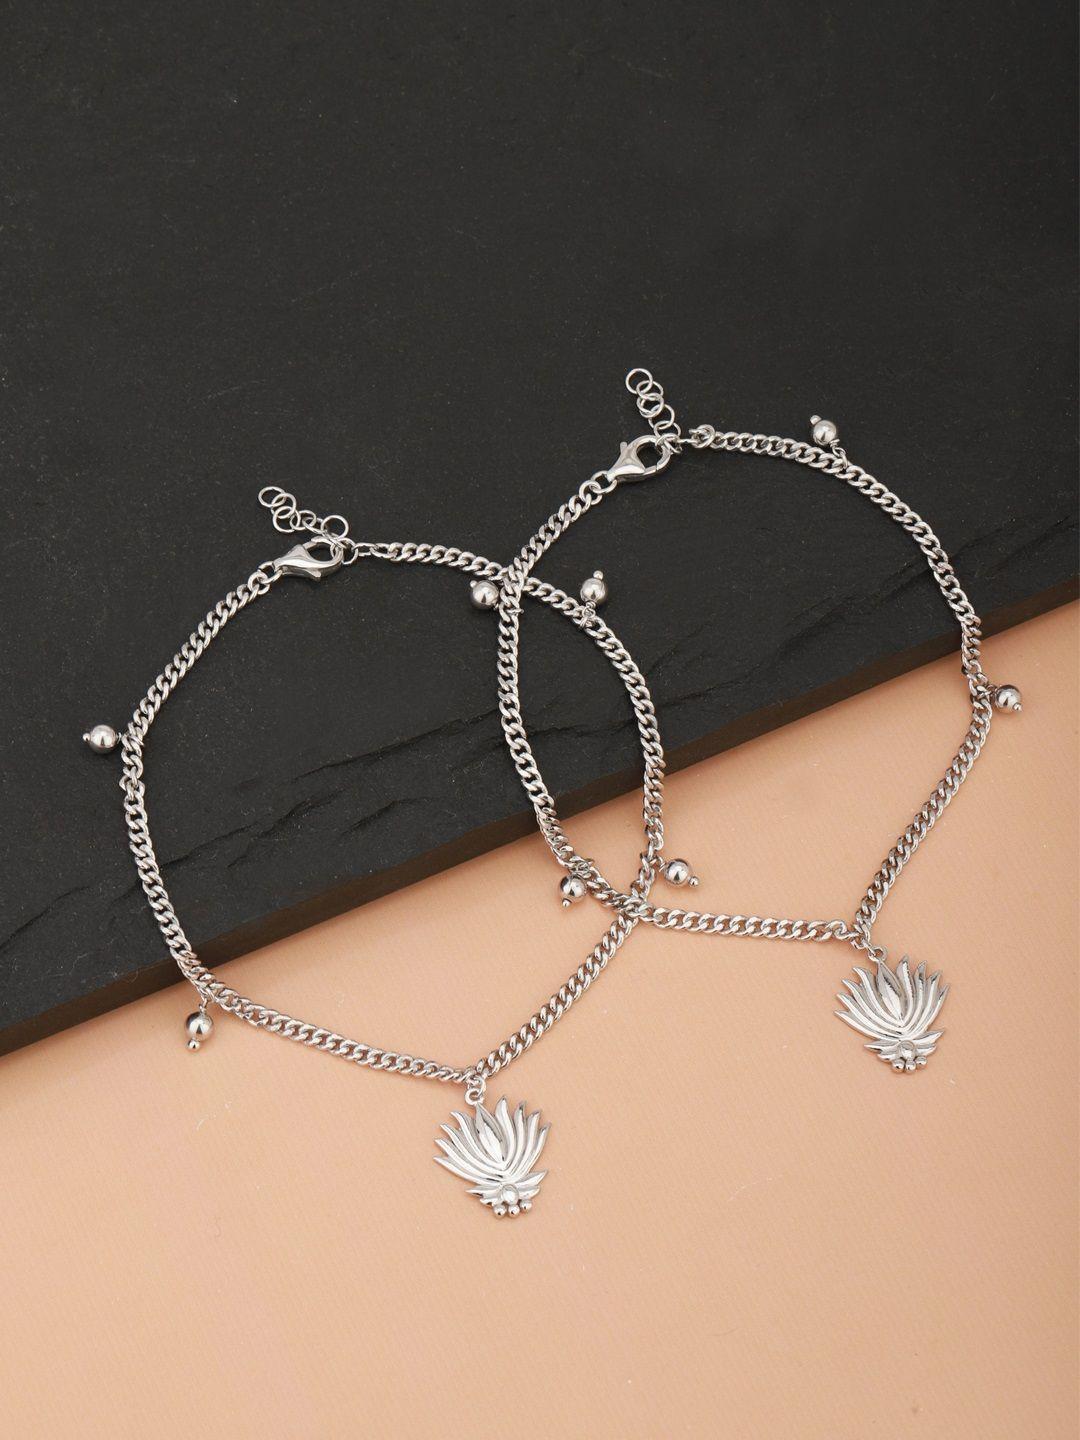 carlton london set of 2 silver-toned rhodium-plated anklets